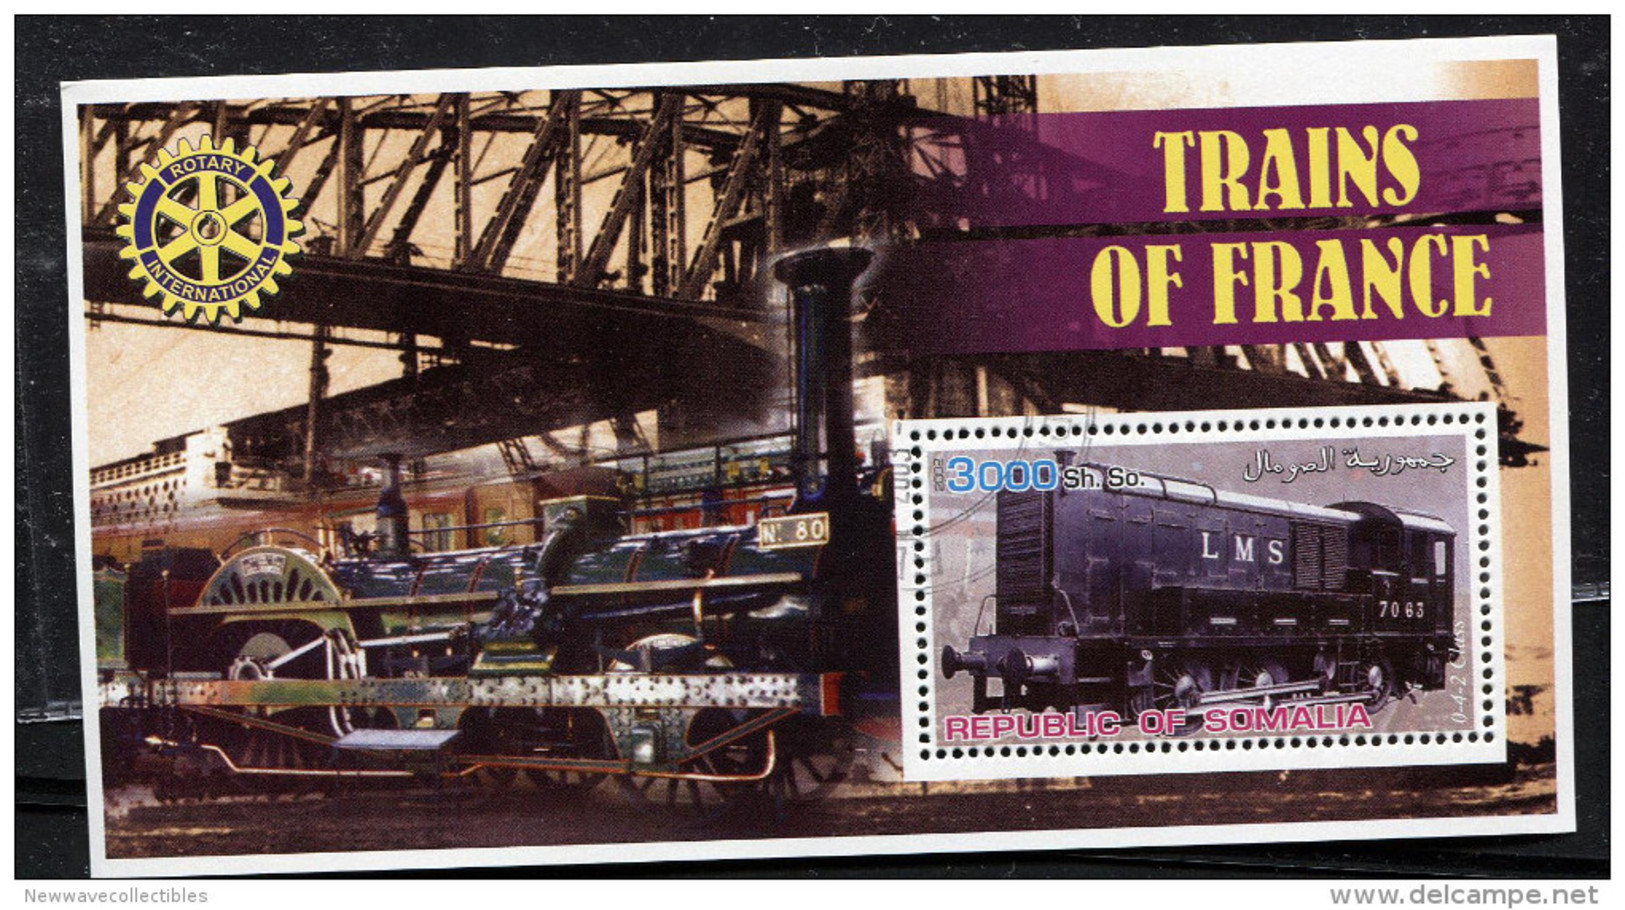 TRAINS,LOCOMOTIVE On SOUVENIR STAMP SHEET,CTO,Used,TRAINS Of FRANCE - Trains